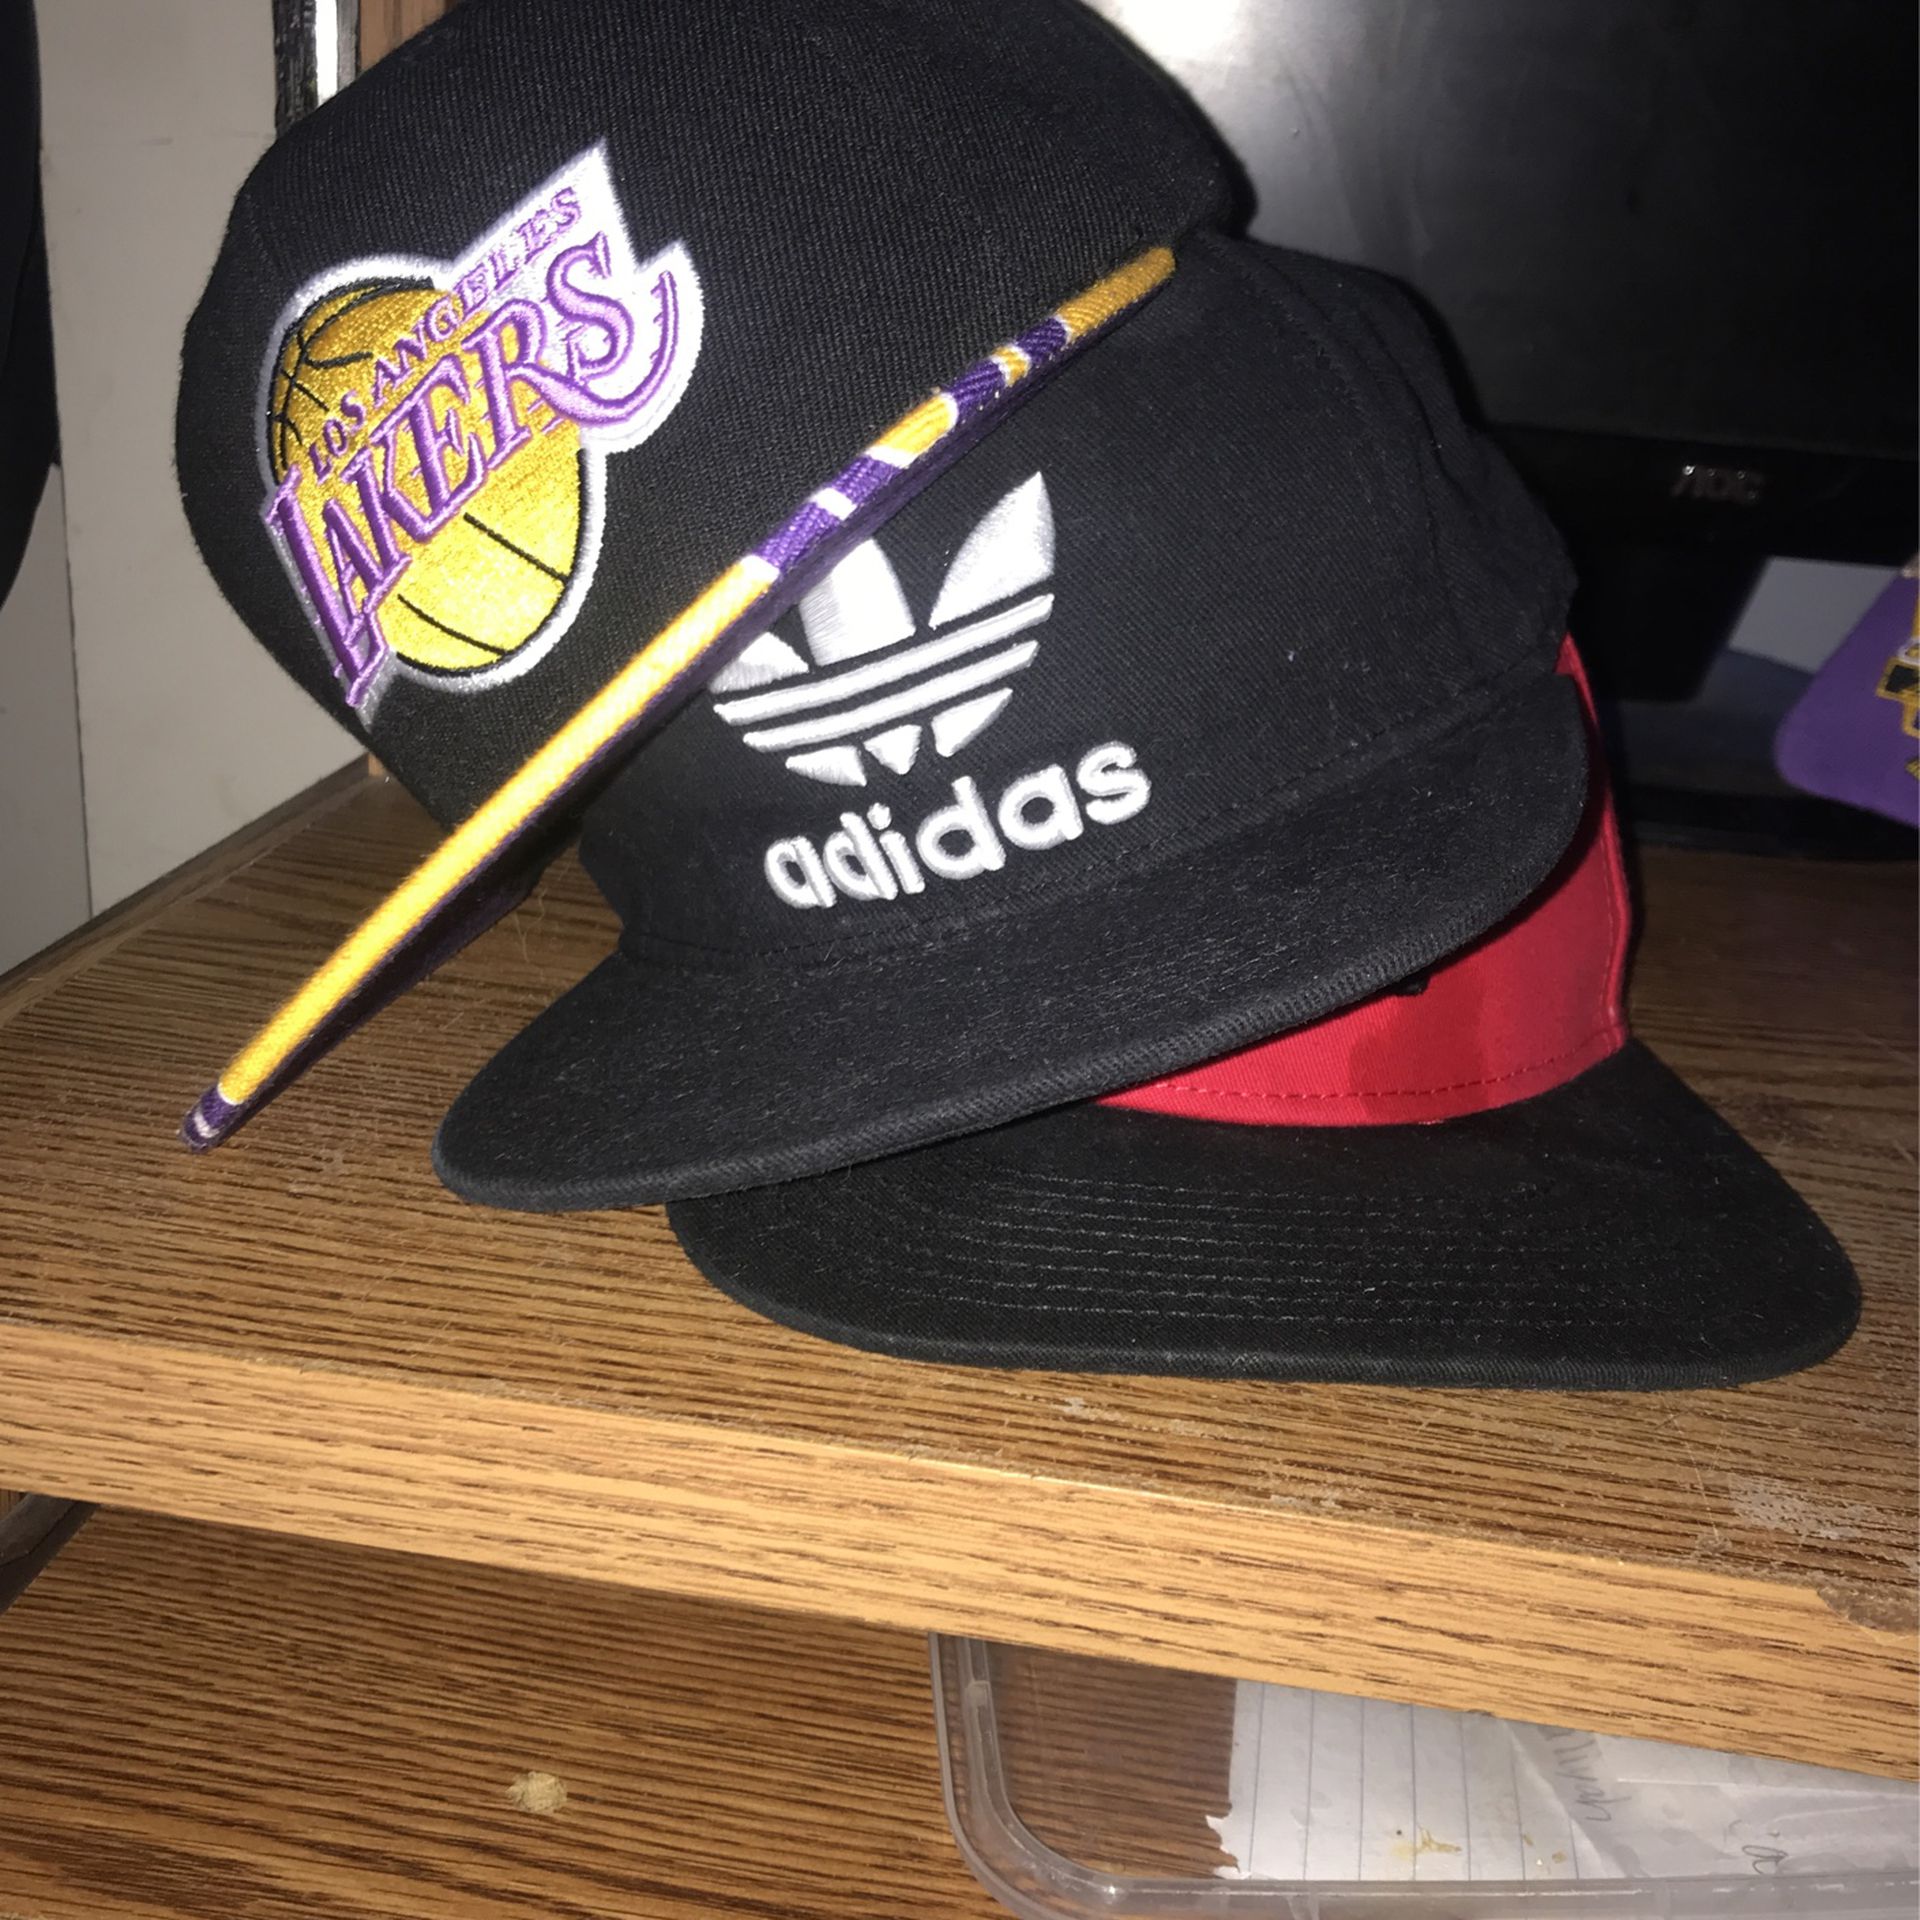 overskydende Gutter Stadion 3 Hats, A Michell And Ness Lakers Hat, A Adidas Hat And A NEFF Hat for Sale  in Wichita, KS - OfferUp